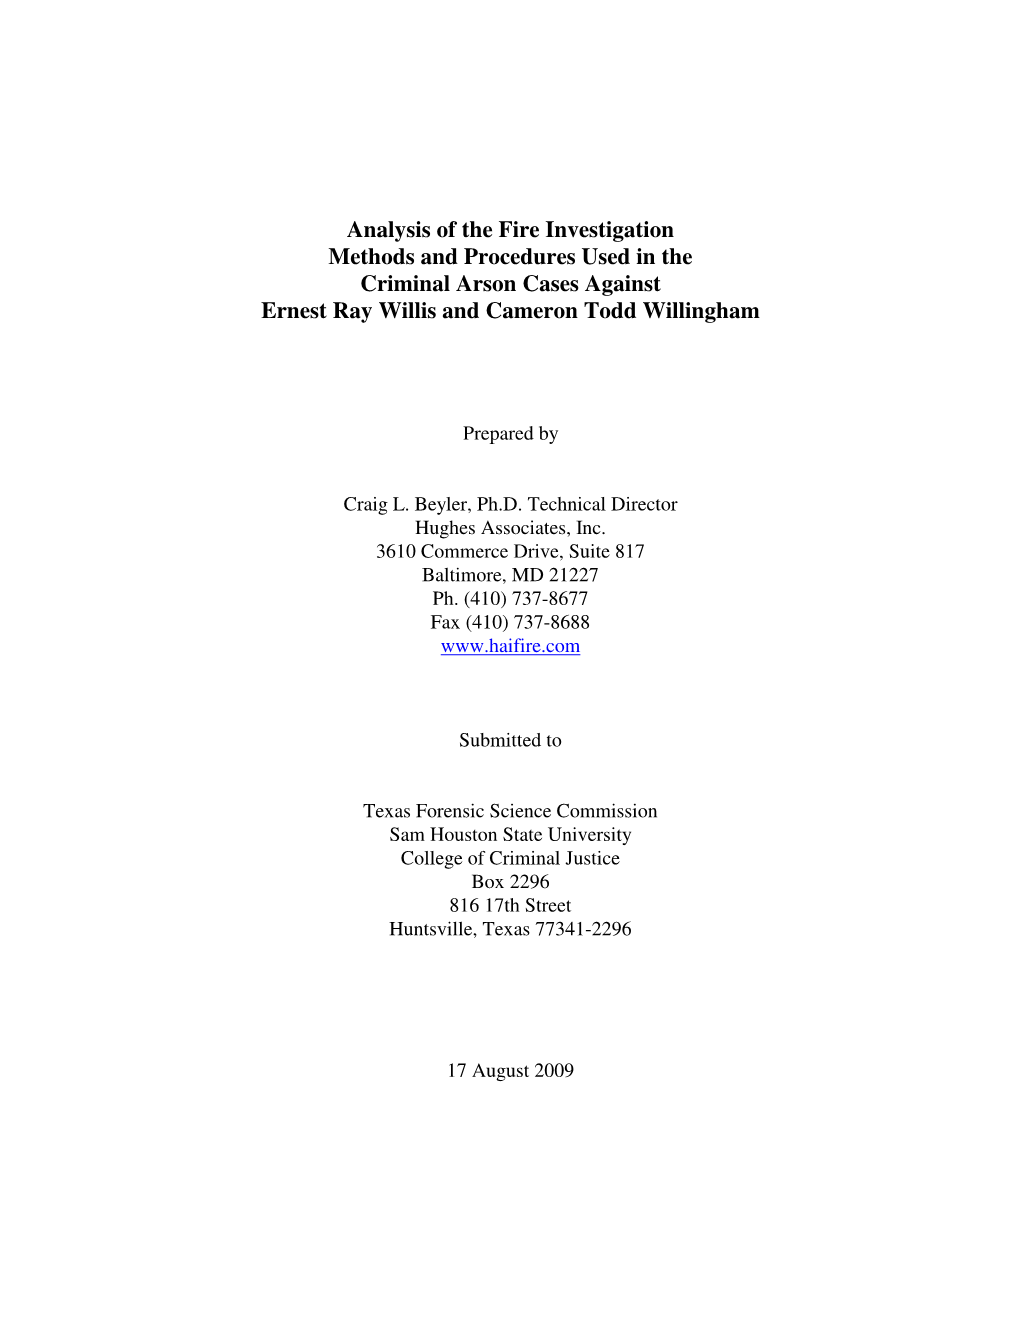 Analysis of the Fire Investigation Methods and Procedures Used in the Criminal Arson Cases Against Ernest Ray Willis and Cameron Todd Willingham